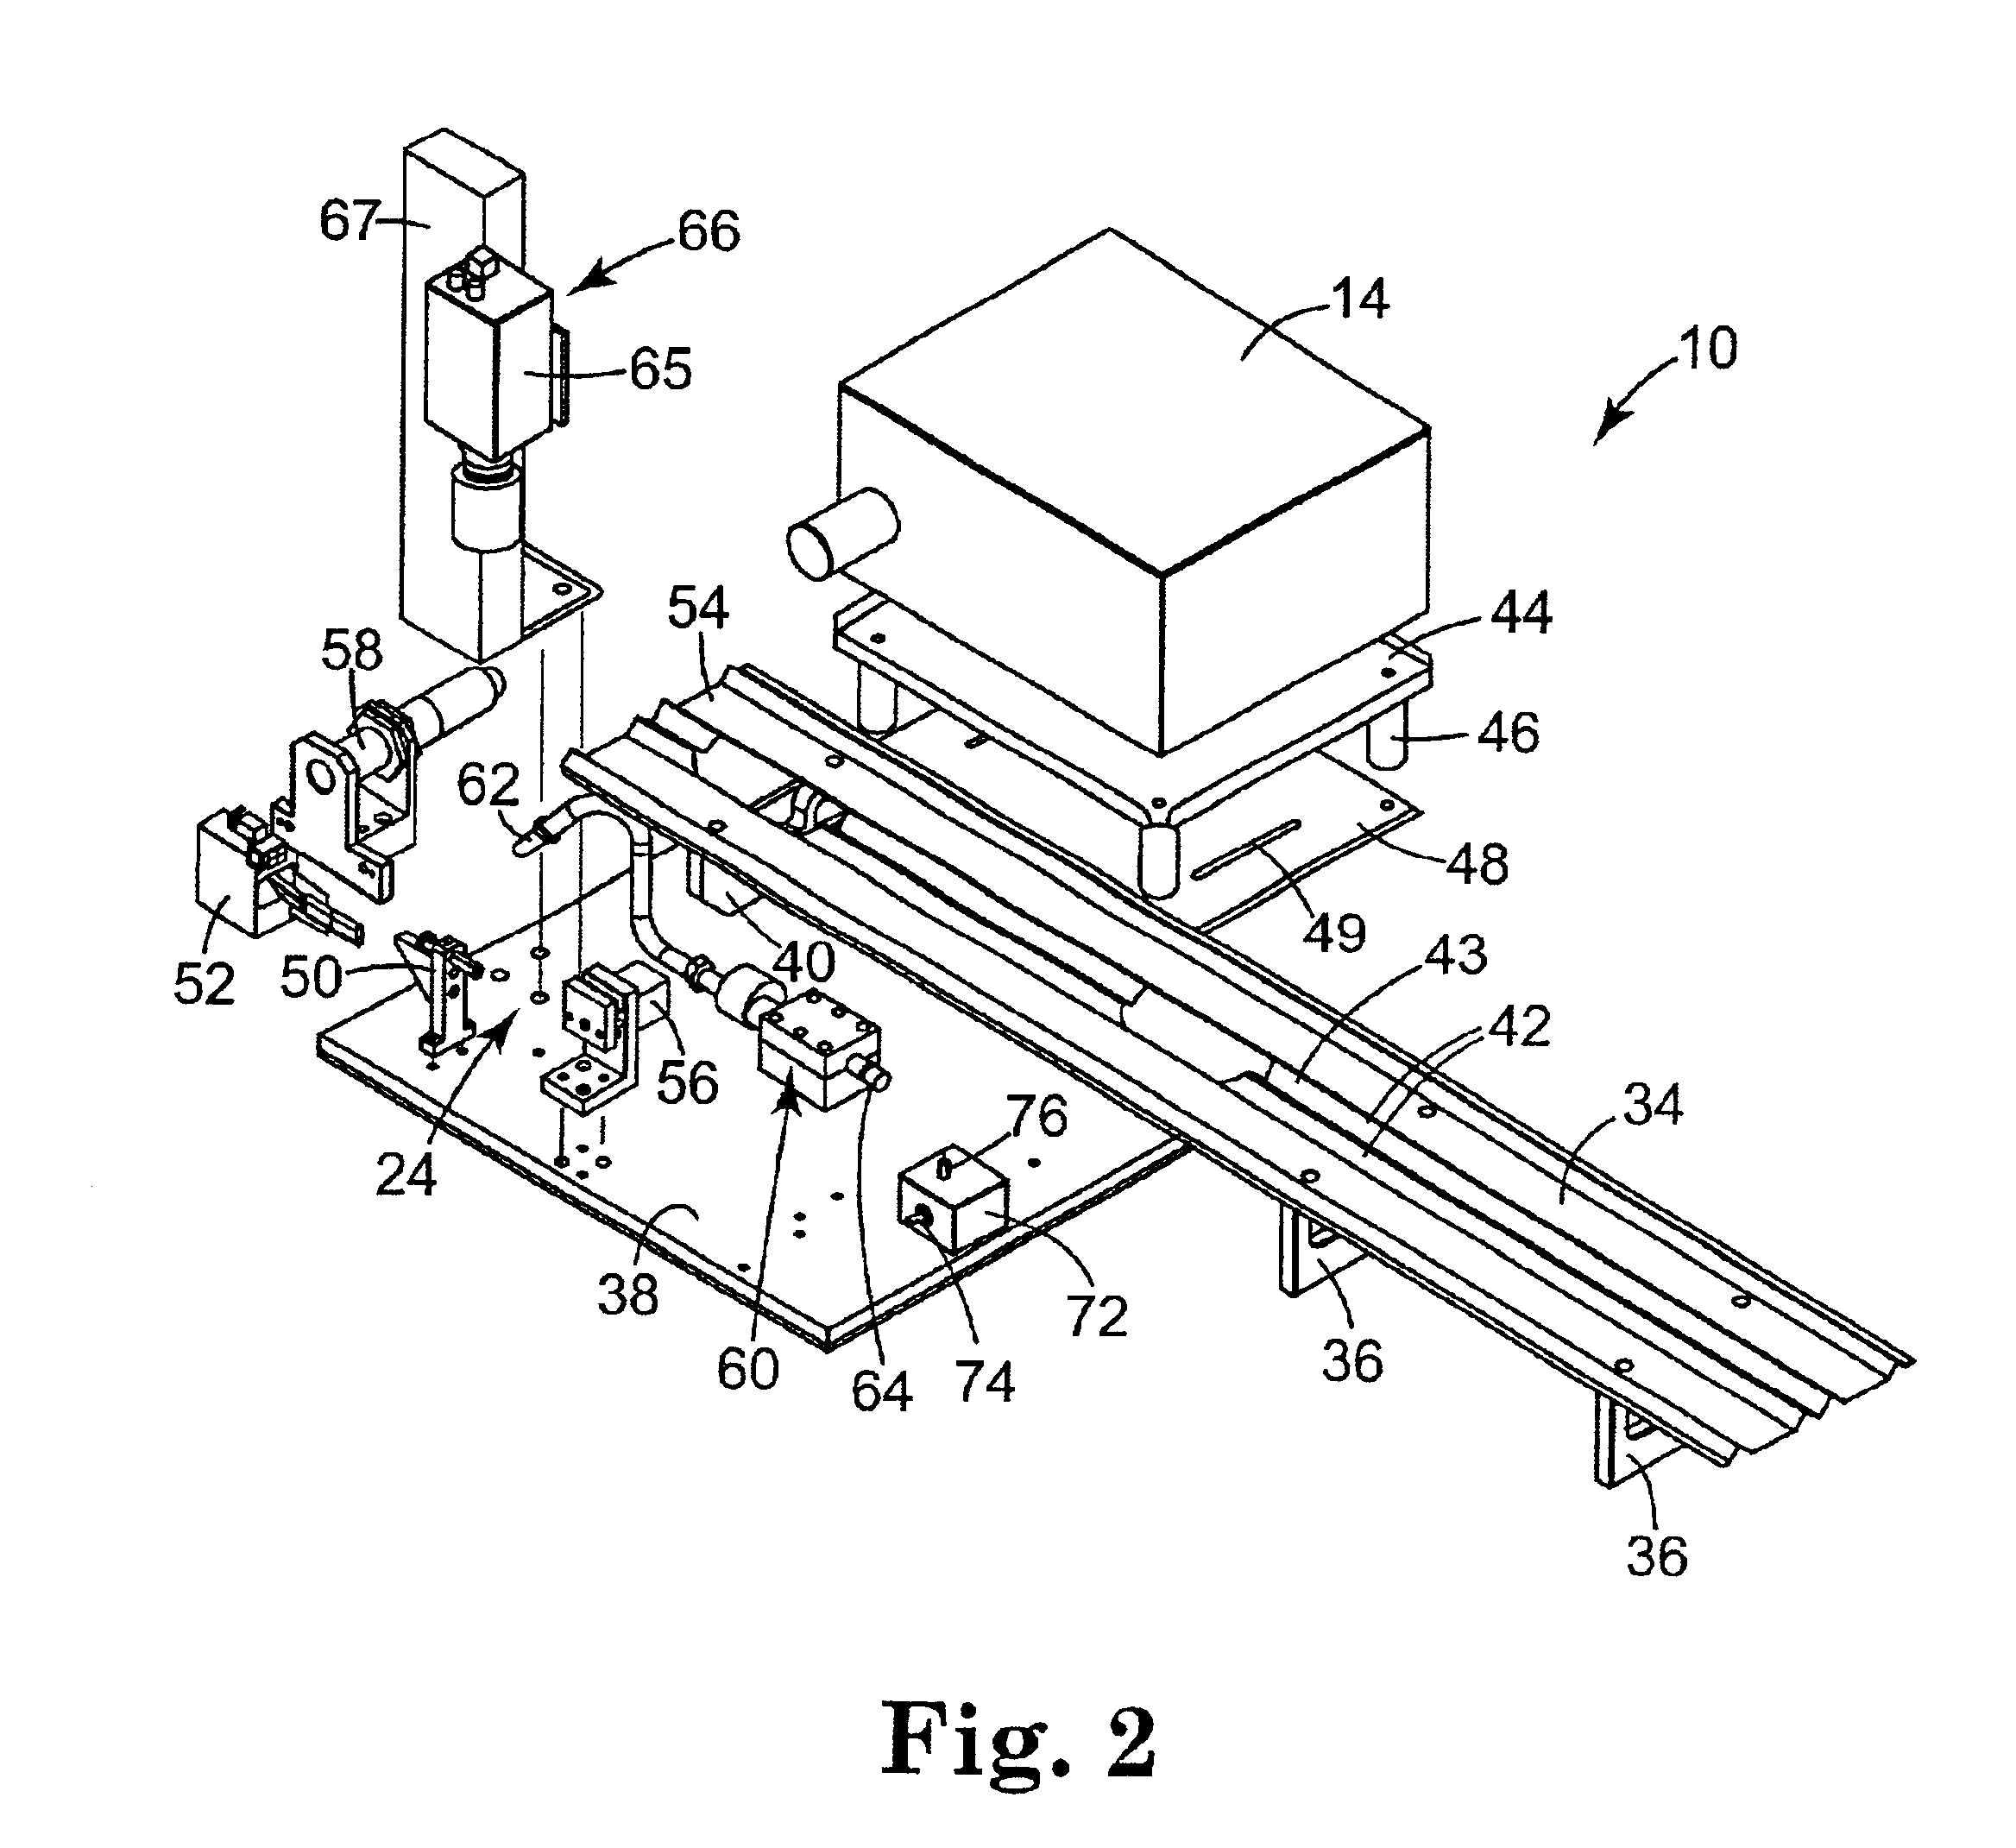 Apparatus and method for closed-loop control of RF generator for welding polymeric catheter components